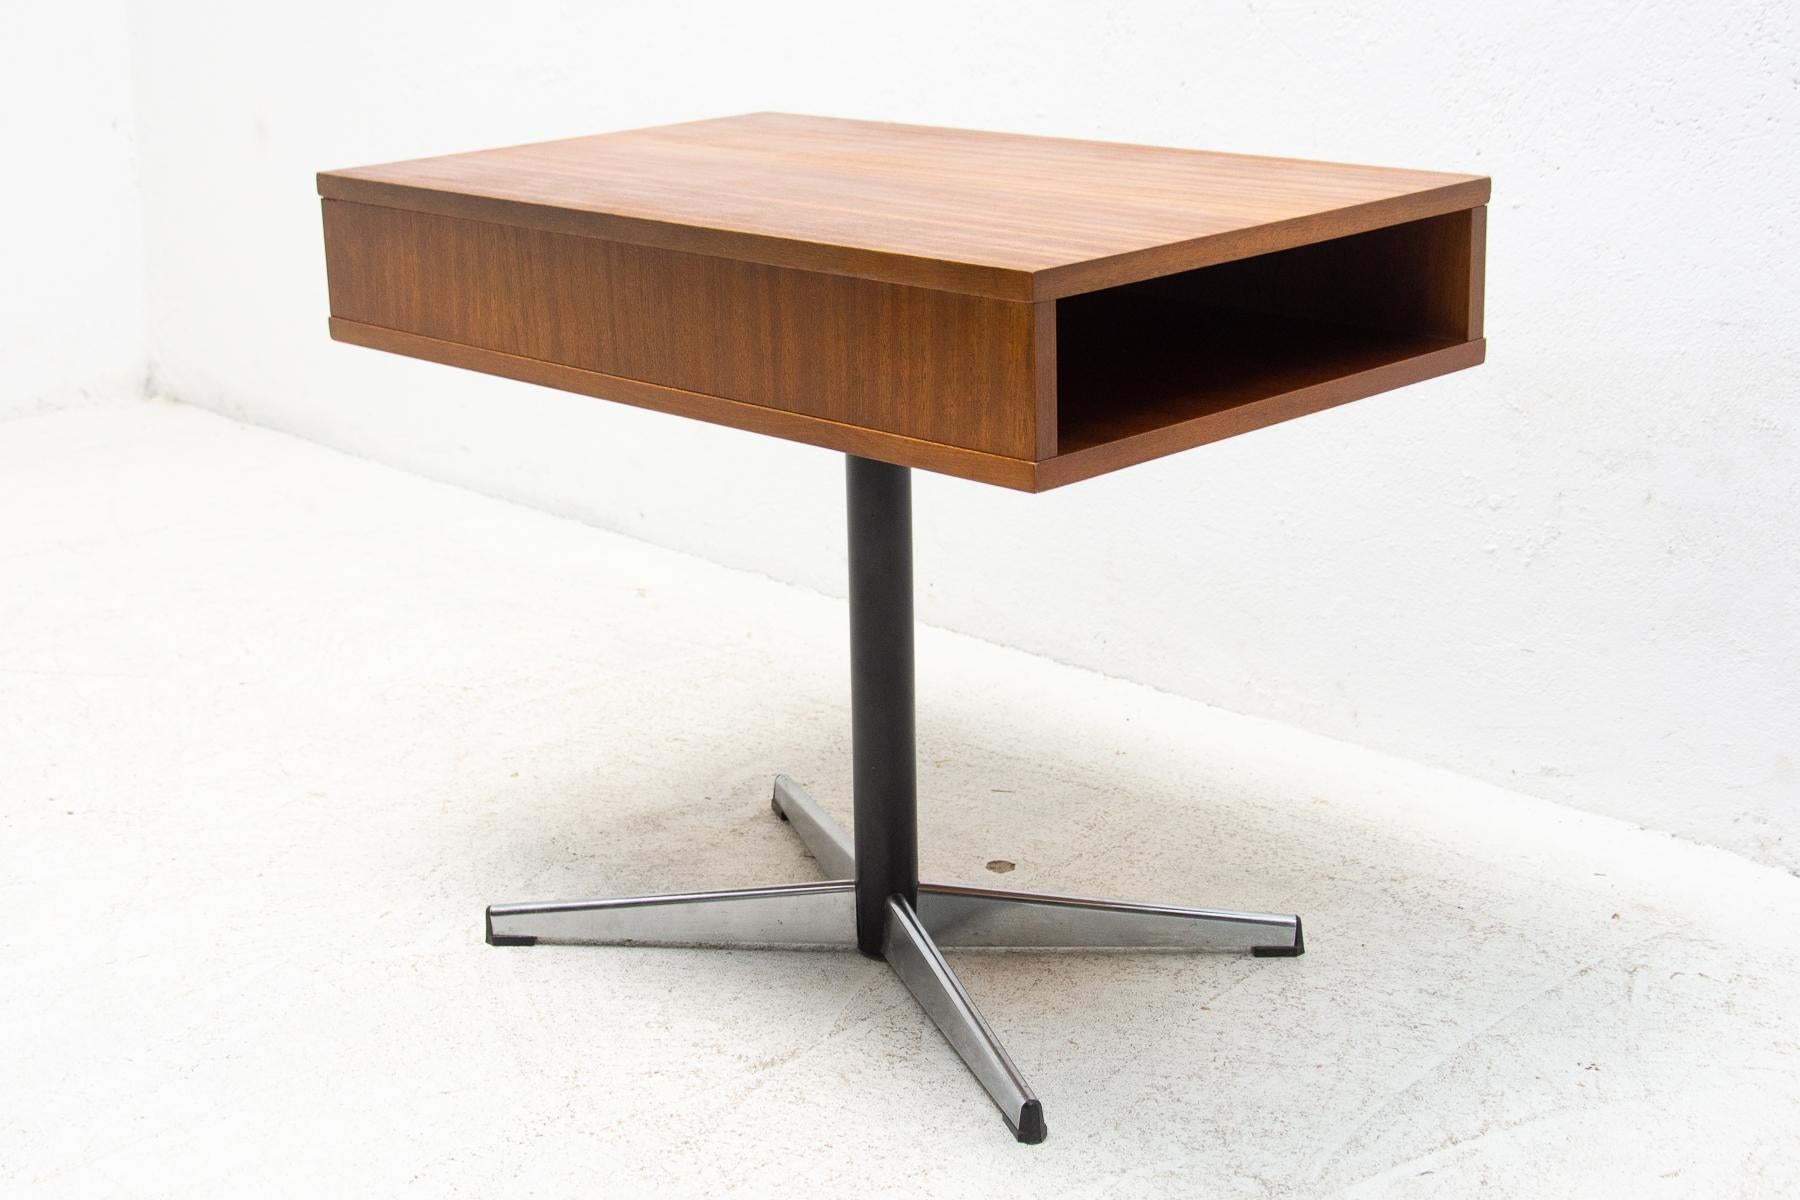 Swivel TV table or side table, 1970´s, Czechoslovakia, made of mahogany. In good vintage condition.

Measures: Height 59 cm, width 72 cm, depth: 45 cm.